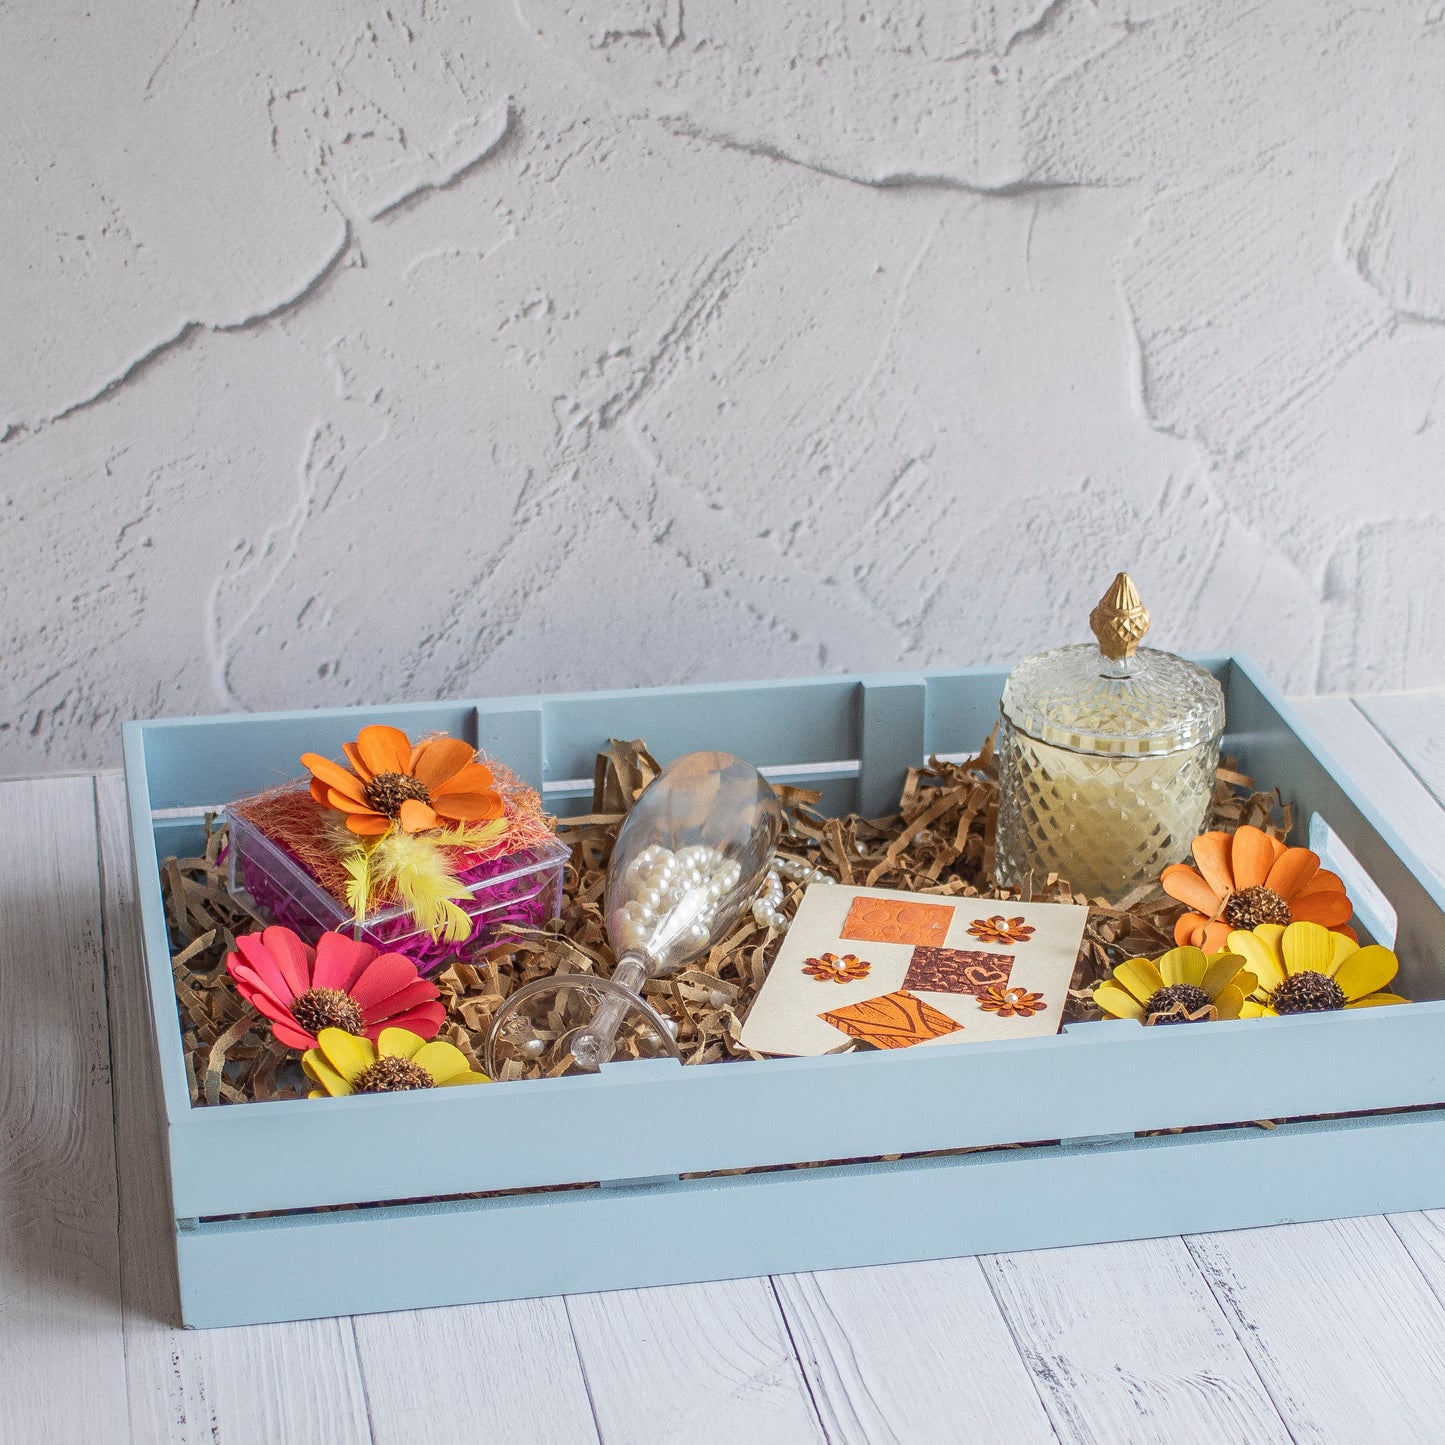 Wooden Storage and Gifting Crates